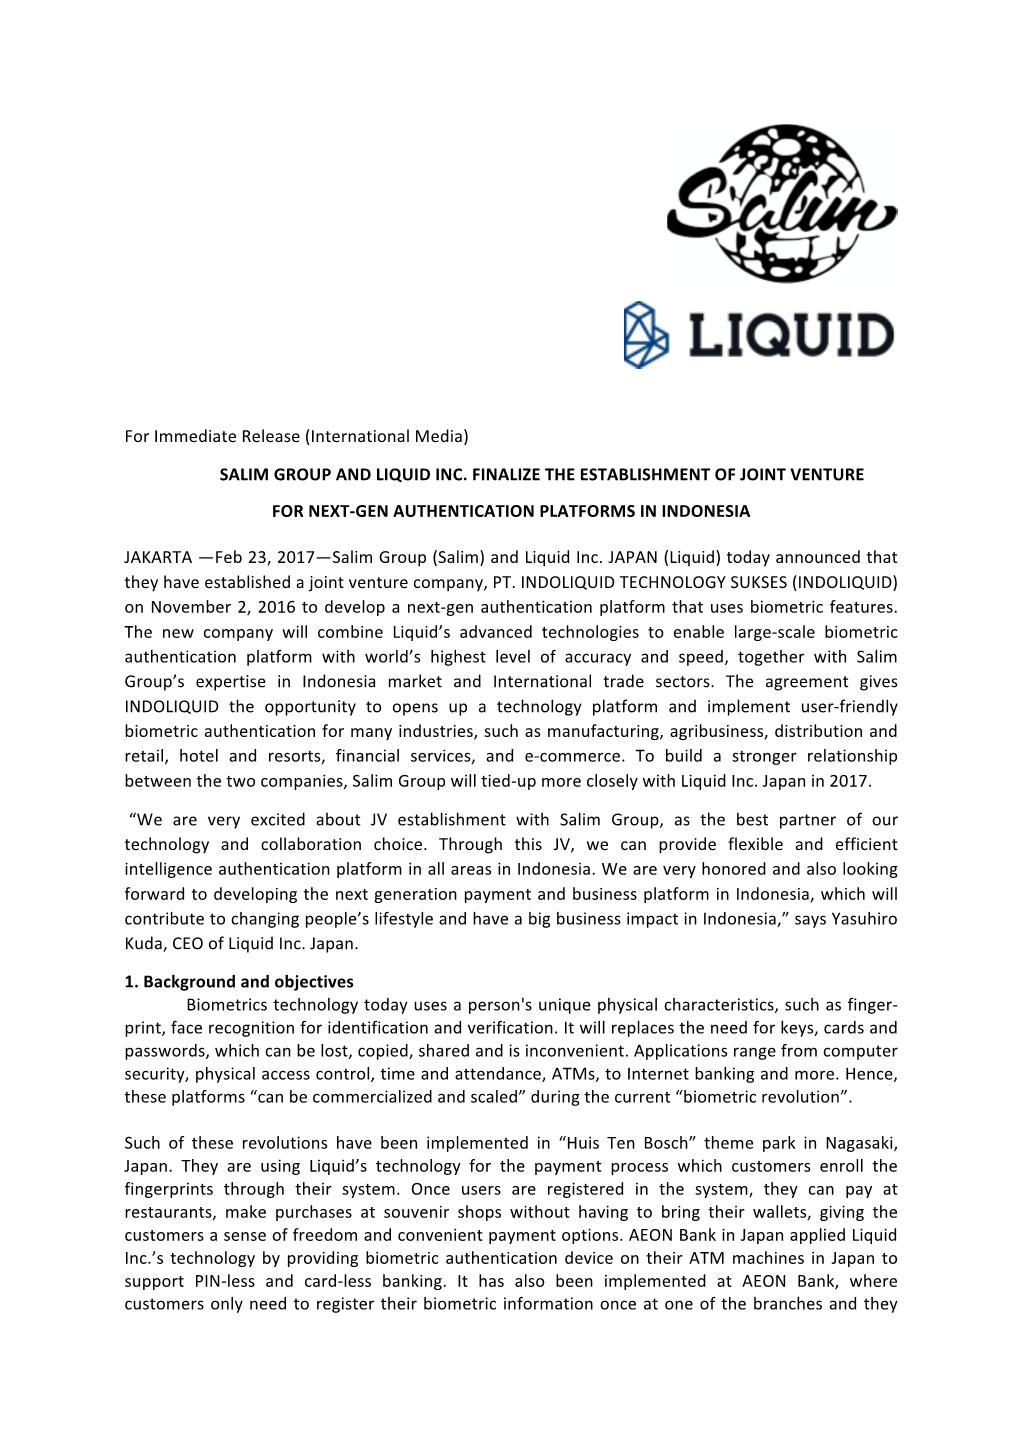 For Immediate Release (International Media) SALIM GROUP and LIQUID INC. FINALIZE the ESTABLISHMENT of JOINT VENTURE for NEXT